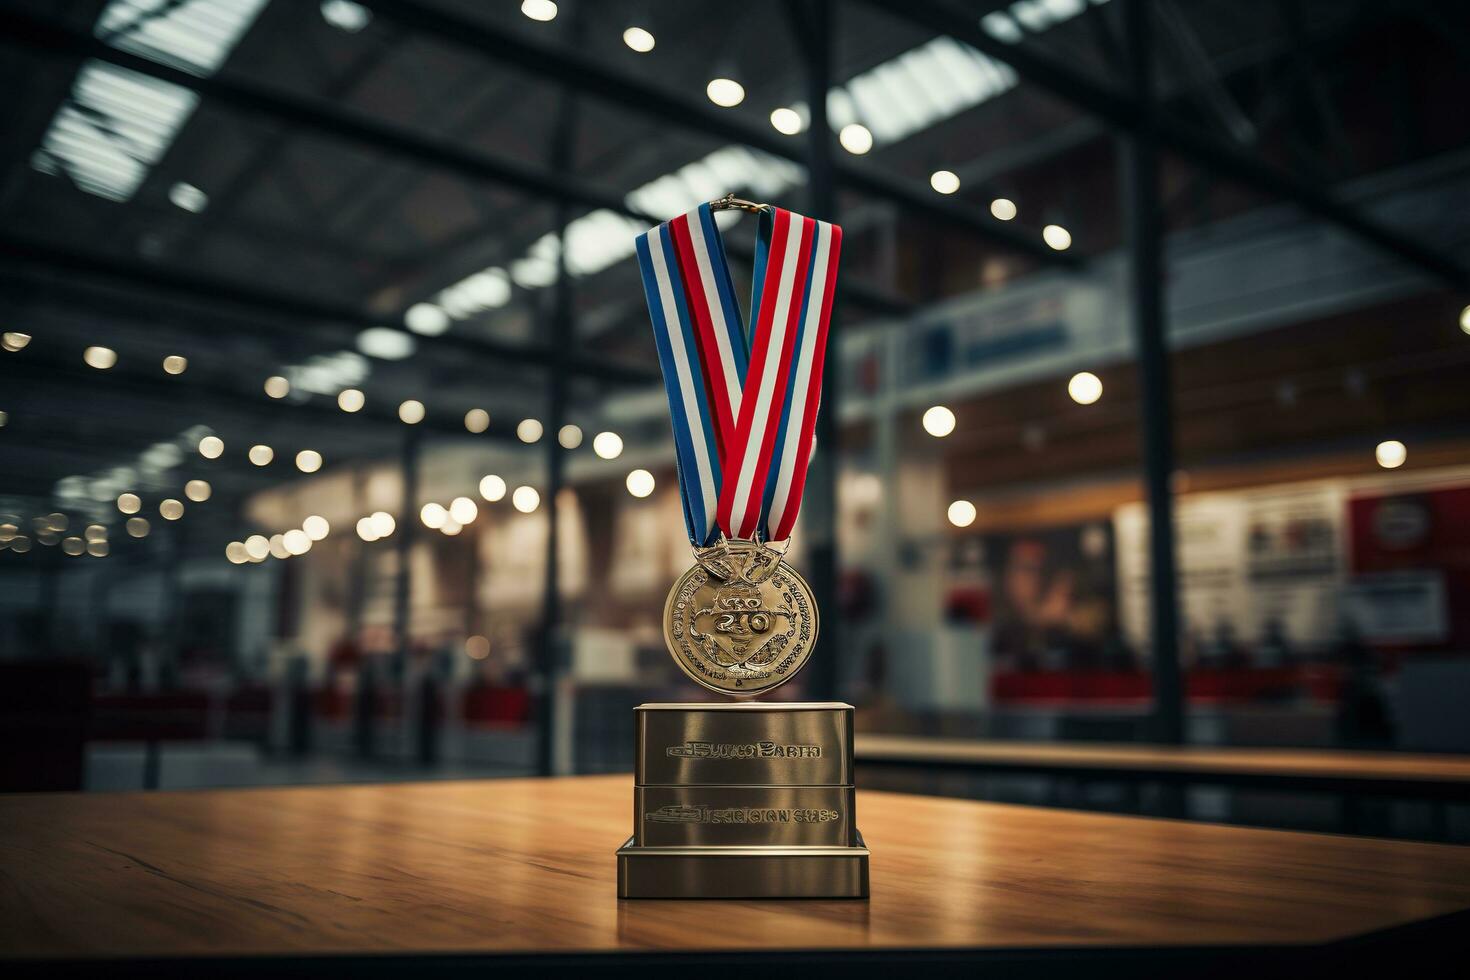 The winner's award in the form of medal on wooden table. Generated by artificial intelligence photo